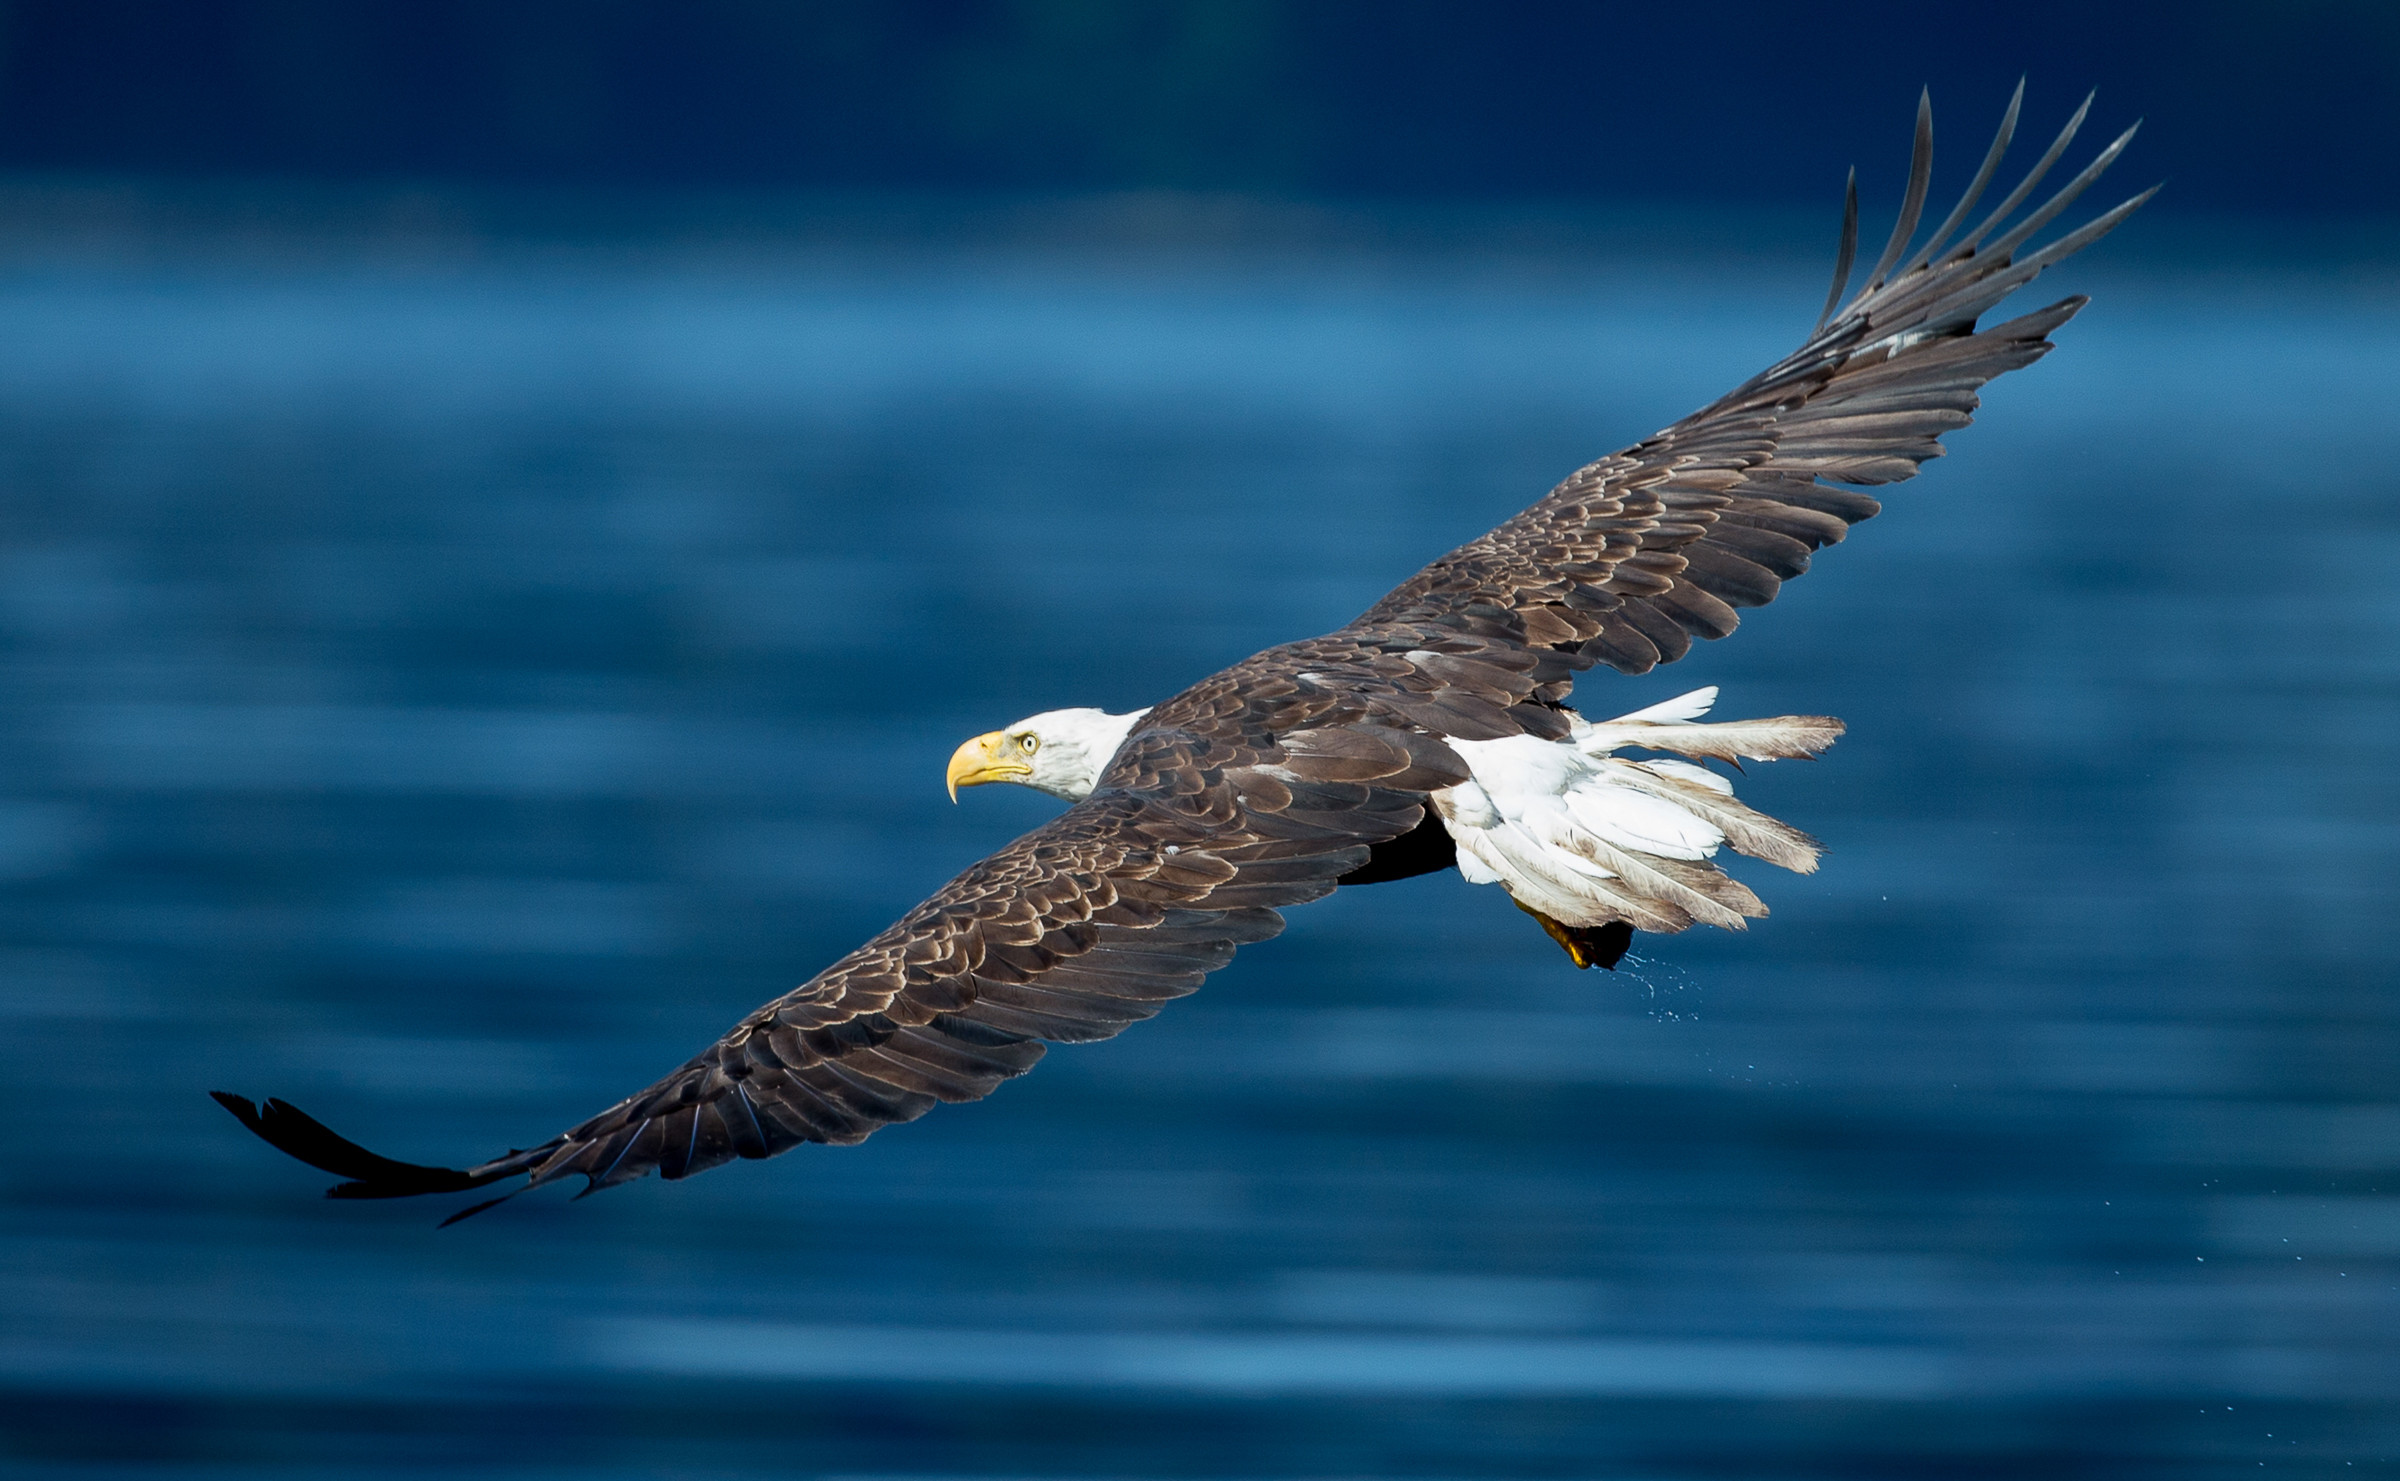 Look for Bald Eagles from the Dyckman Street Pier; though not a sure thing, the massive raptors are sometimes seen here, particluarly in the wintertime. Photo: Ted Lefkovits/Audubon Photography Awards